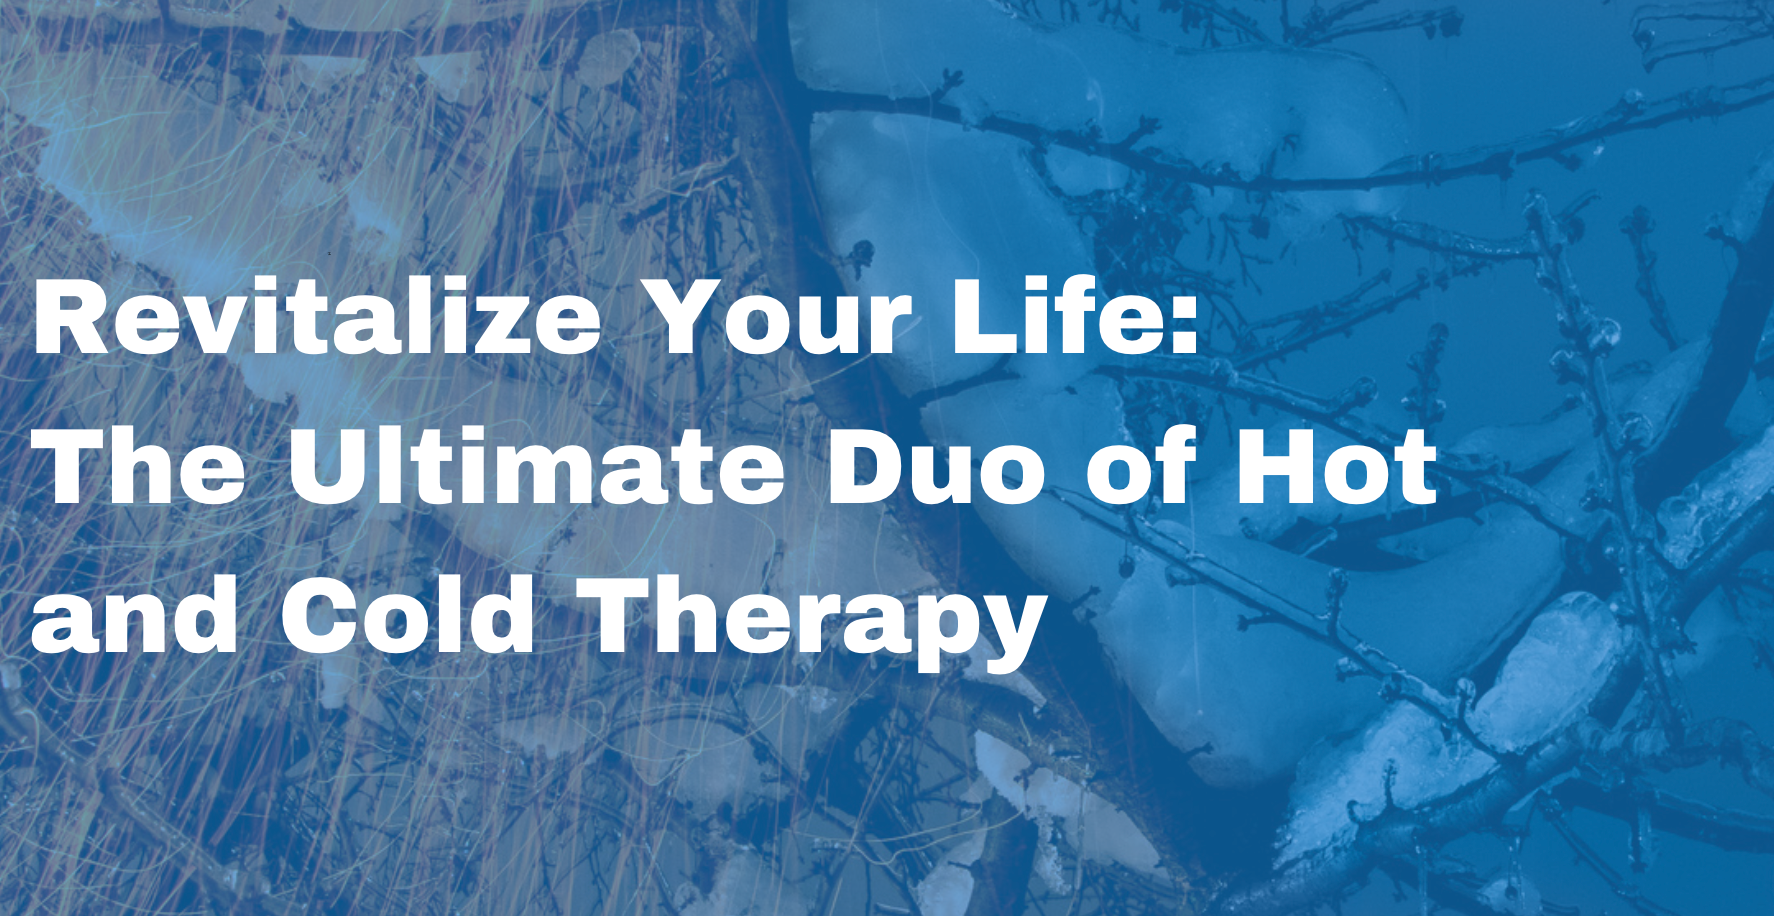 Revitalize Your Life: The Ultimate Duo of Hot and Cold Therapy